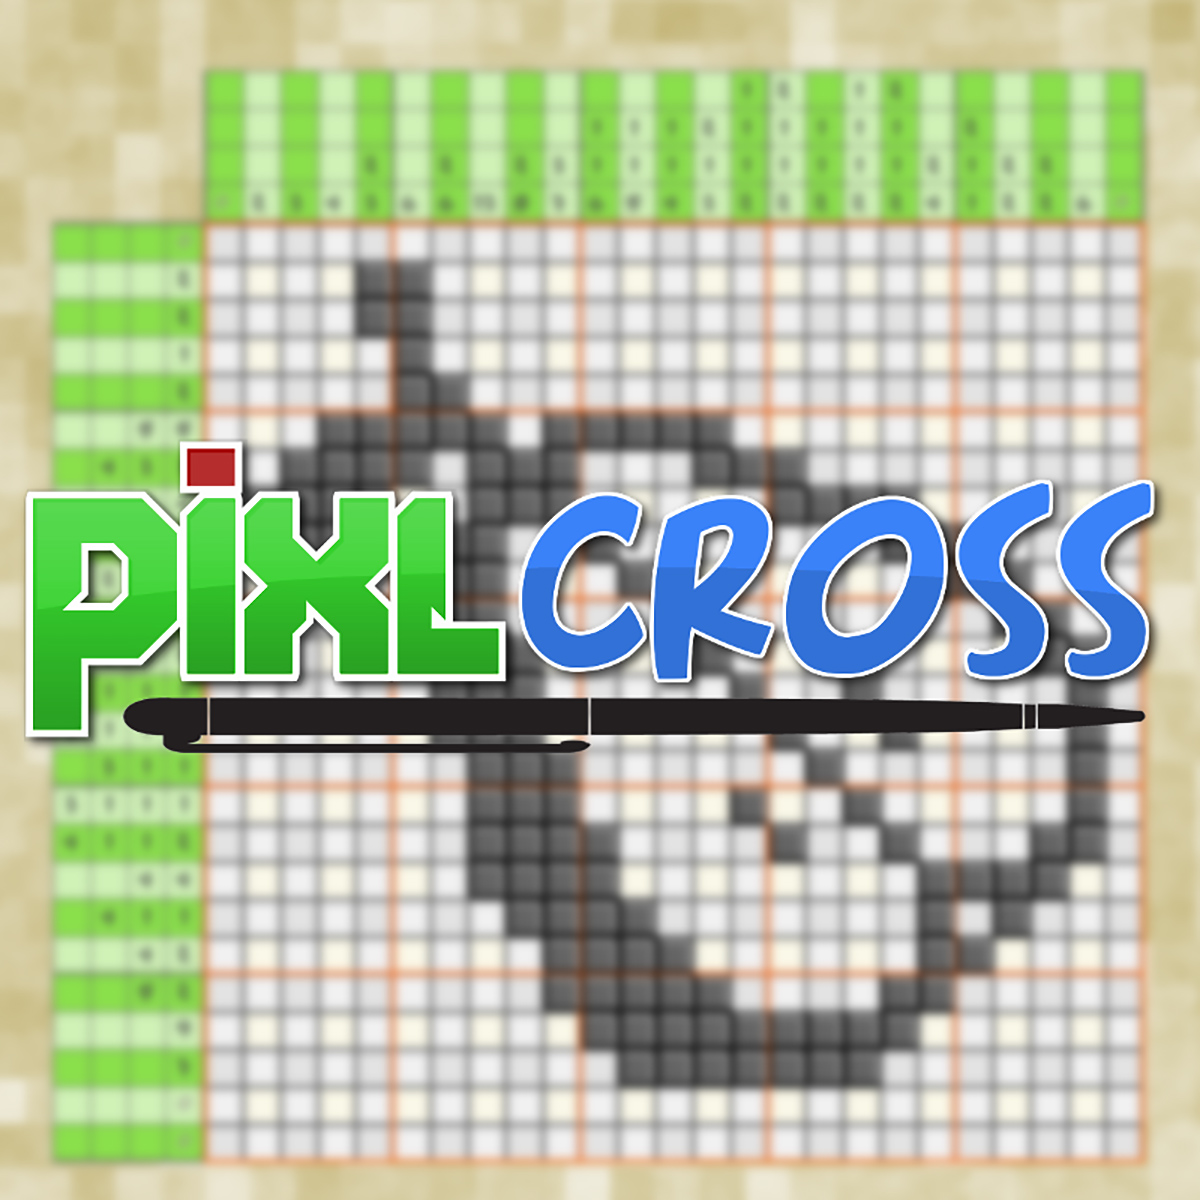 PixlCross review: Picrossing streams